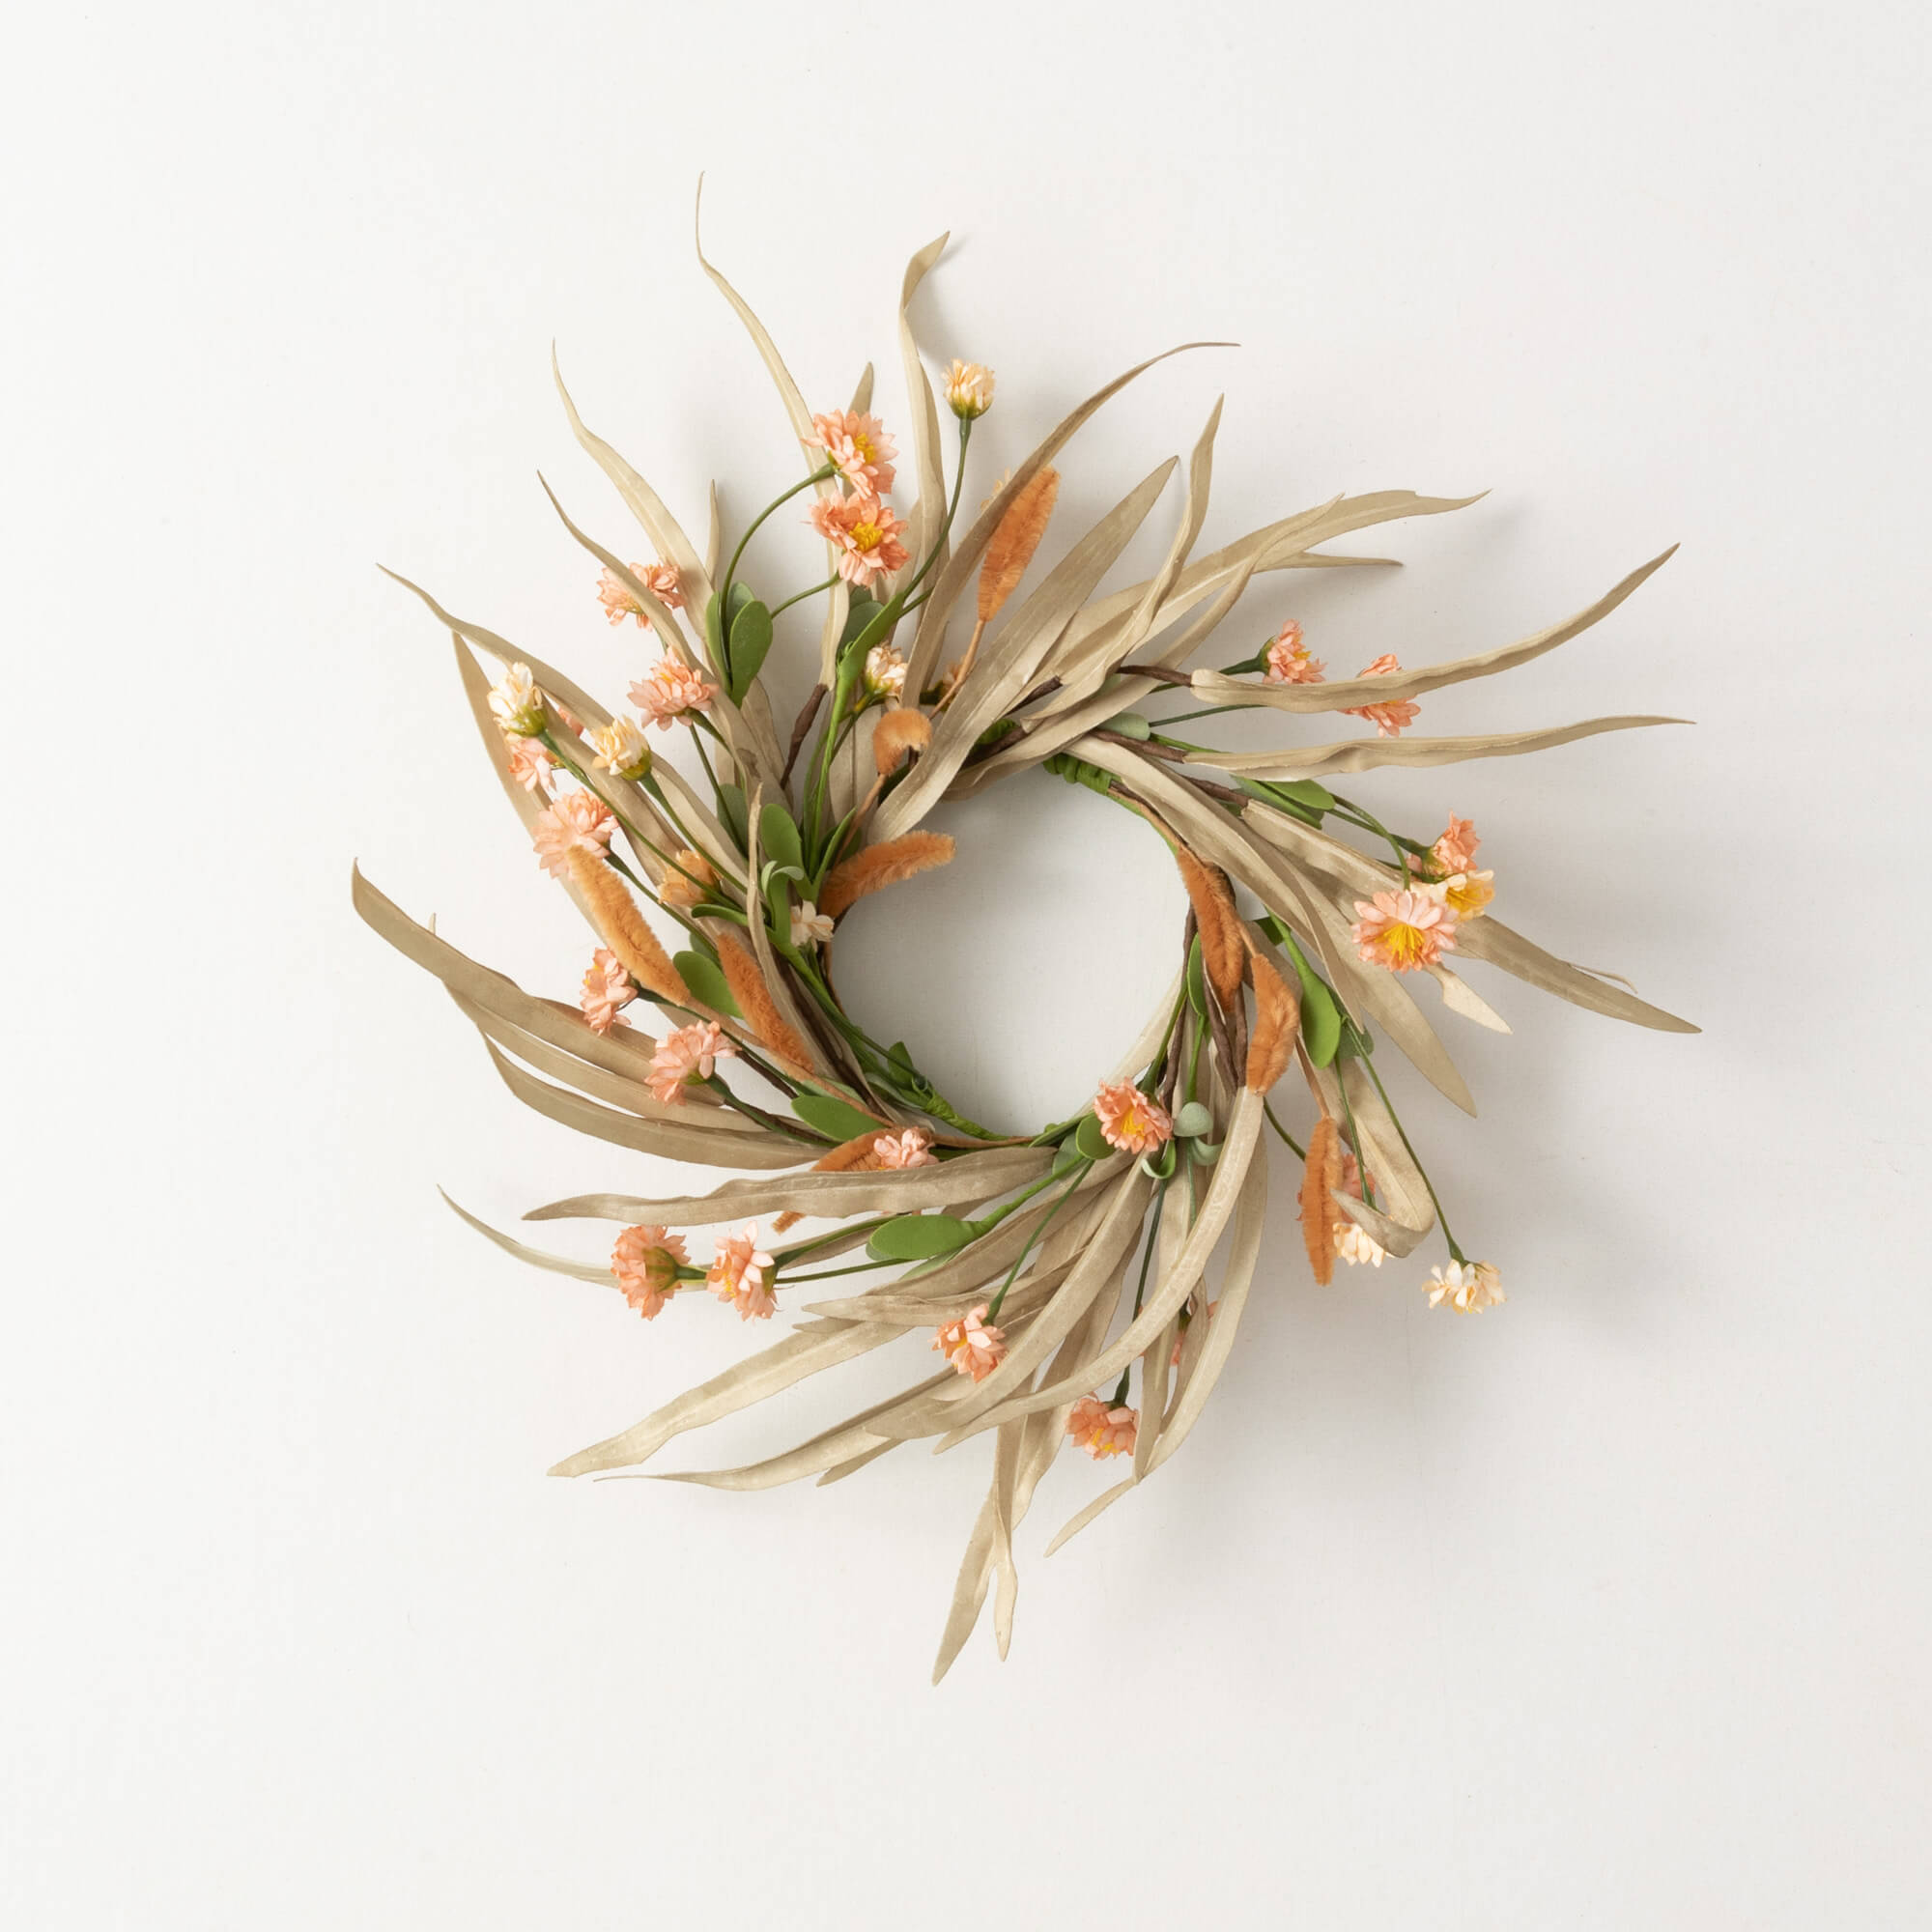 4.5" GRASS BUNNY TAIL RING